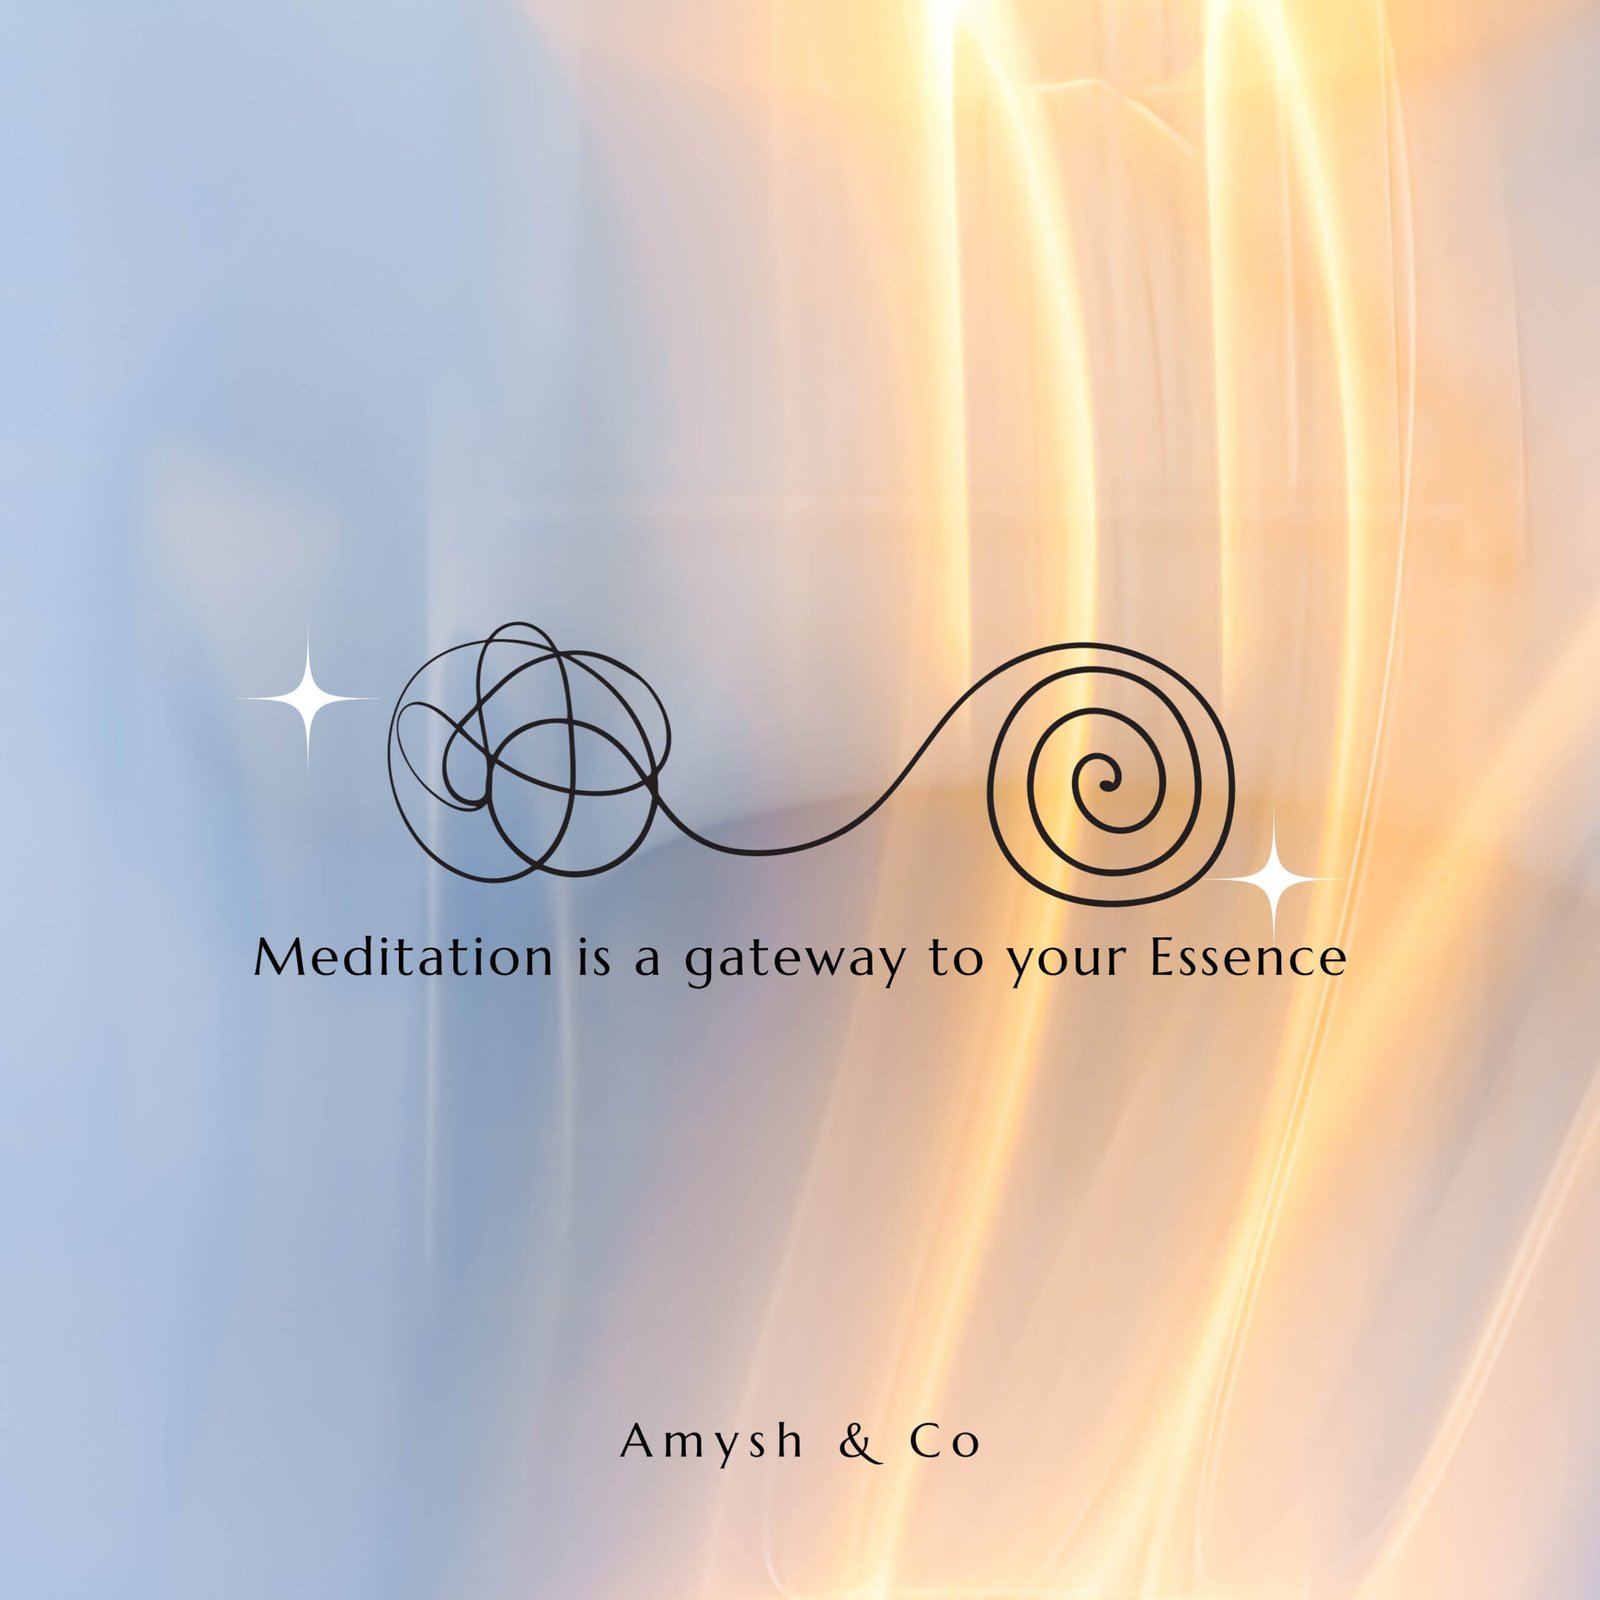 Meditation is a gateway to your Essence